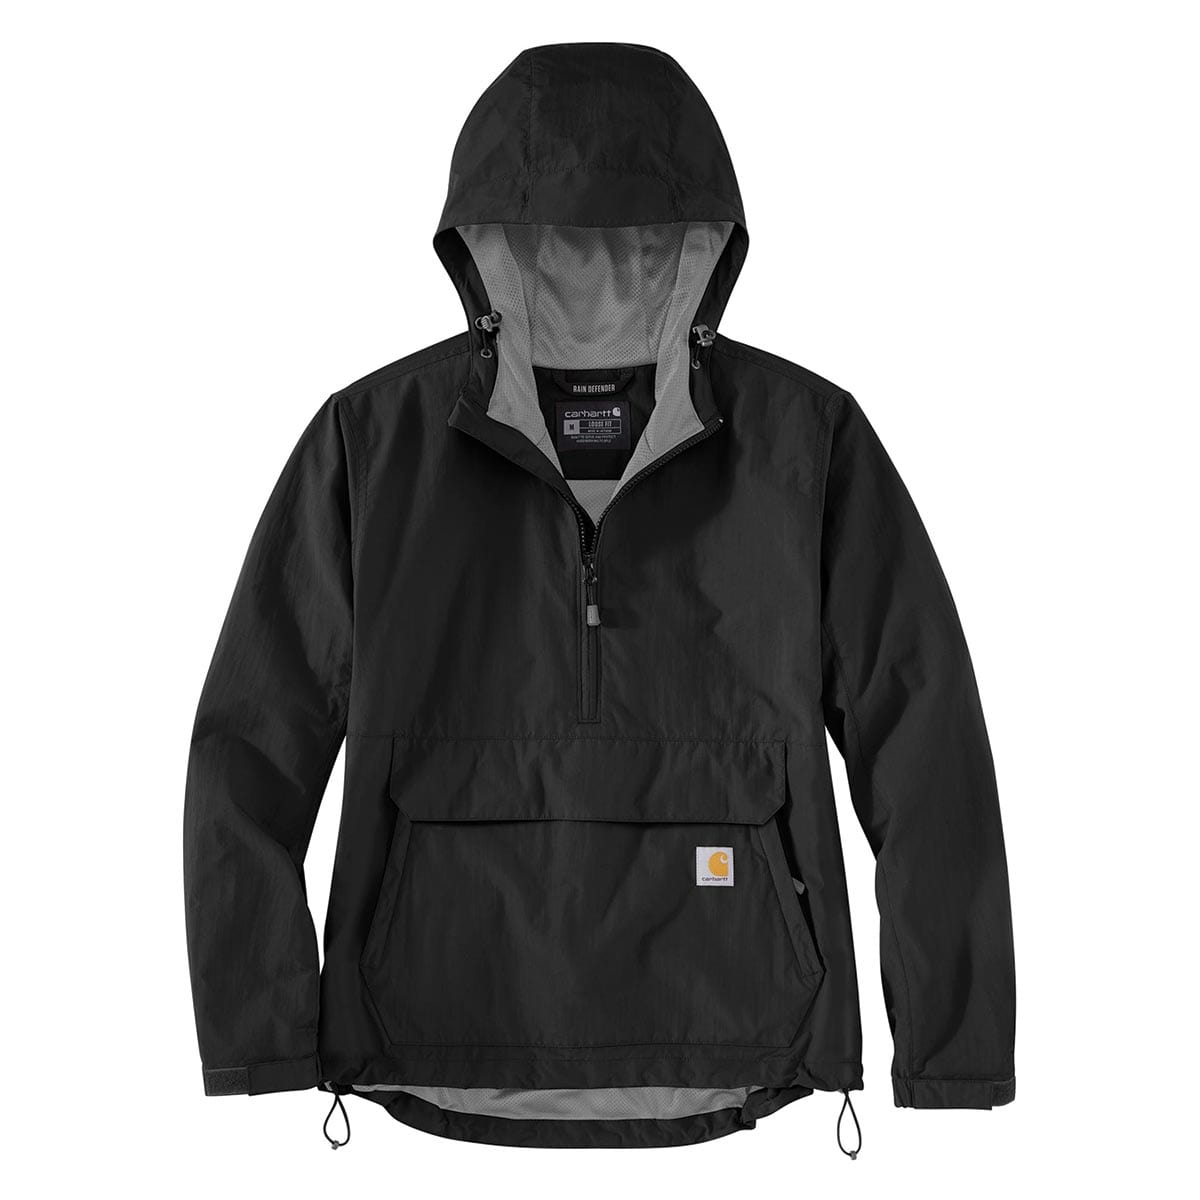 Carhartt Men's Montana Midweight Insulated Jacket at Tractor Supply Co.